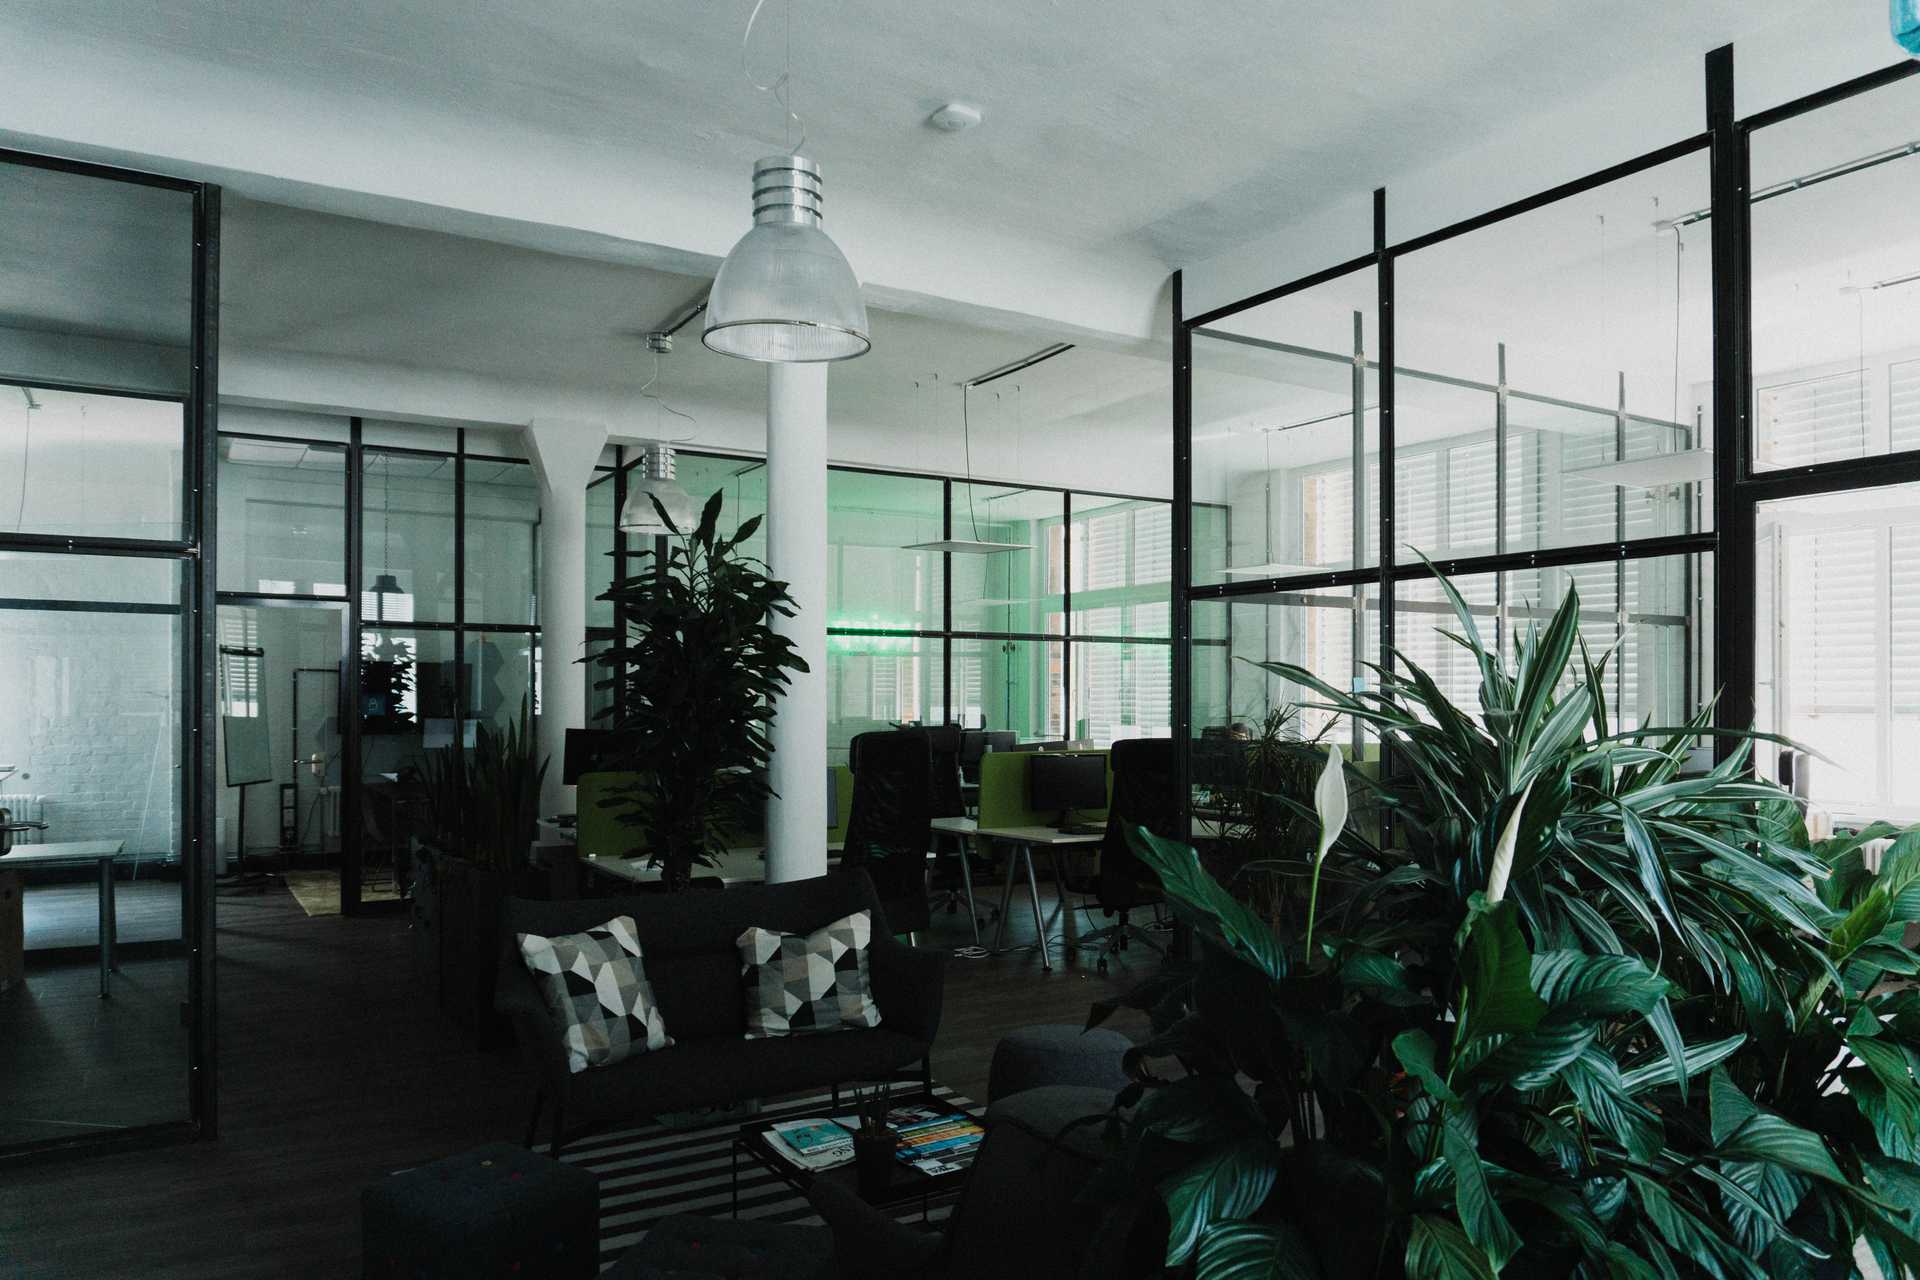 View of qnips office with green plants, a sitting area and glass walls